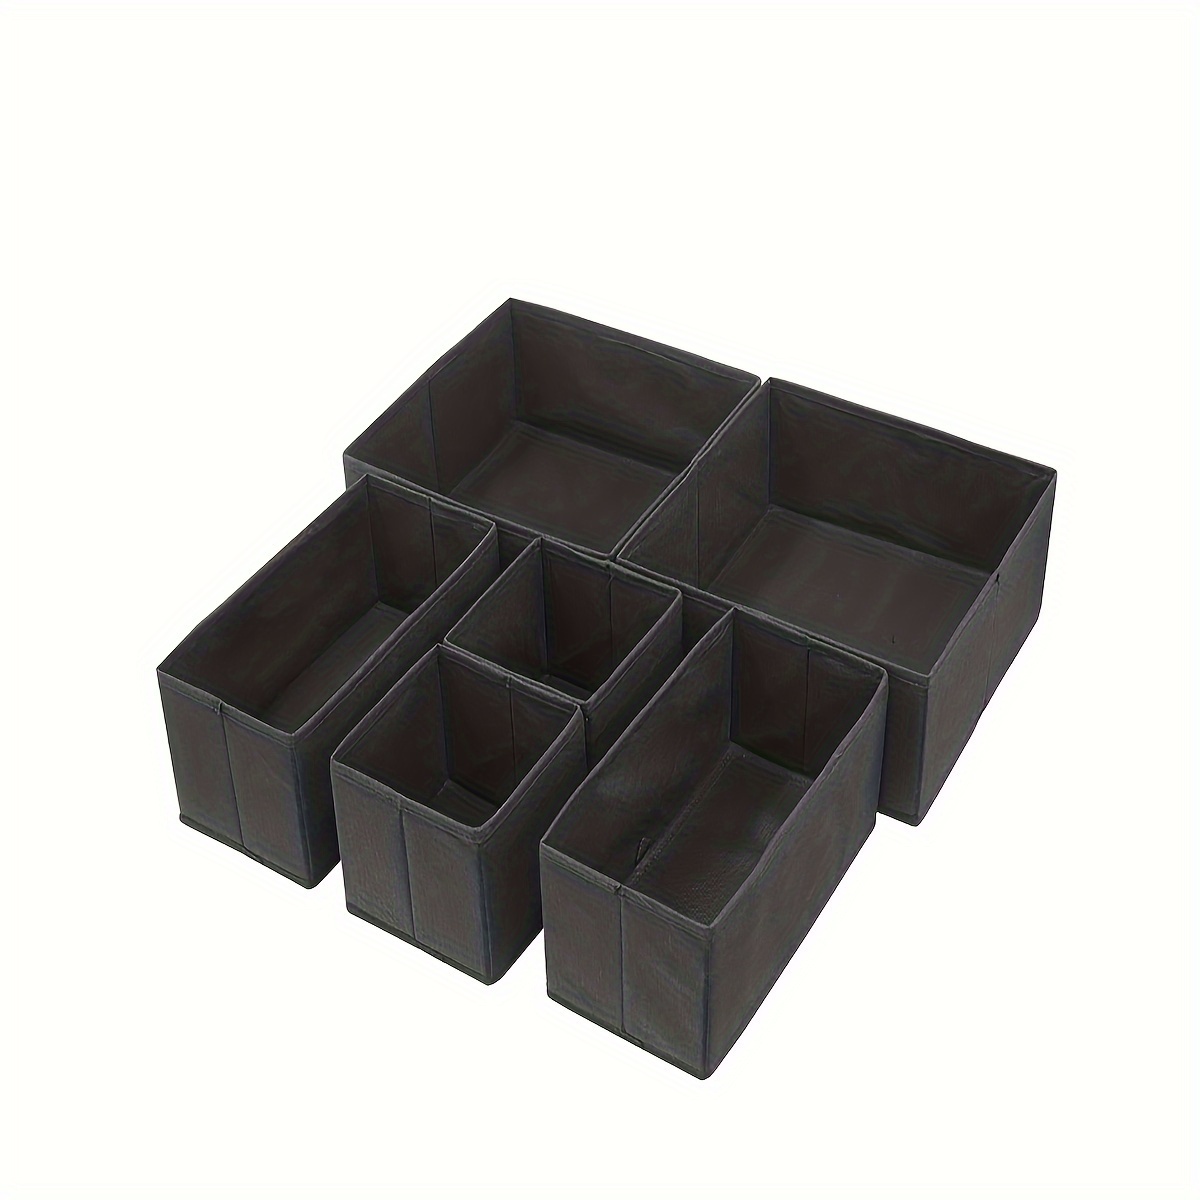 Organizers Pants Classification Drawer Underwear Storage Box Collection  Boxes